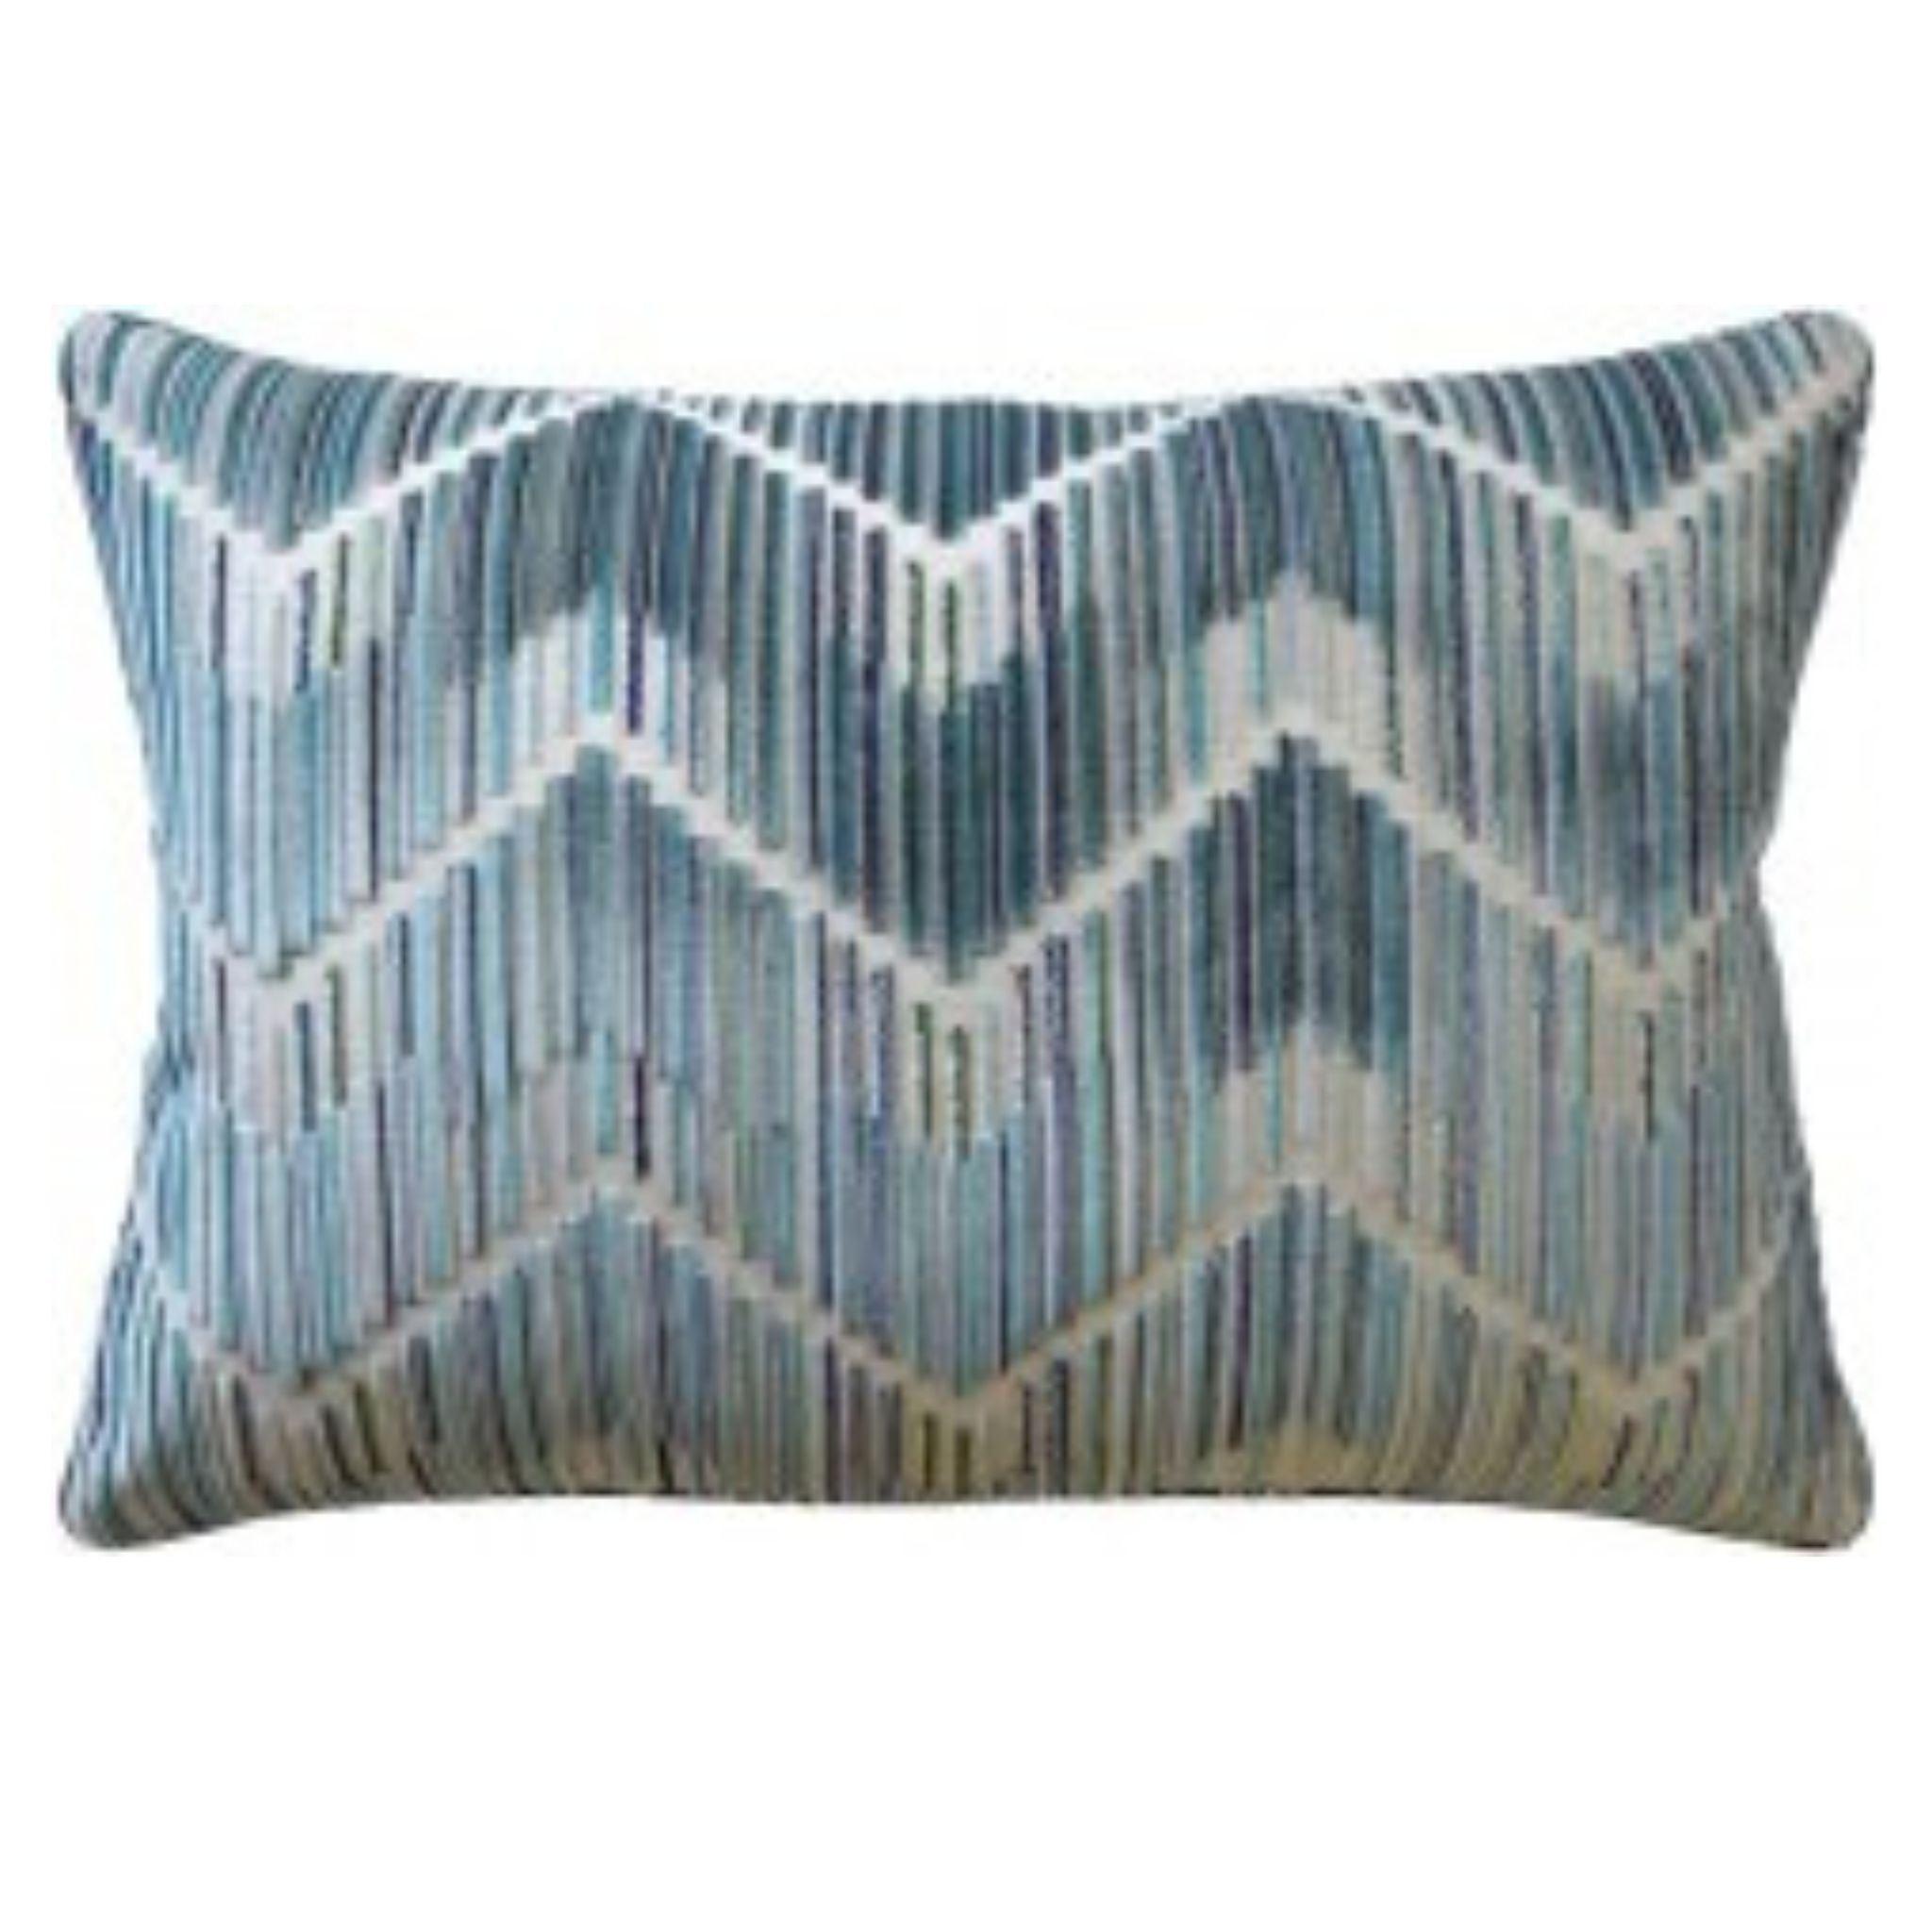 https://www.wellappointedhouse.com/cdn/shop/files/zig-zag-anniston-peacock-turquoise-chevron-decorative-rectangular-throw-pillow-pillows-the-well-appointed-house.jpg?v=1691662192